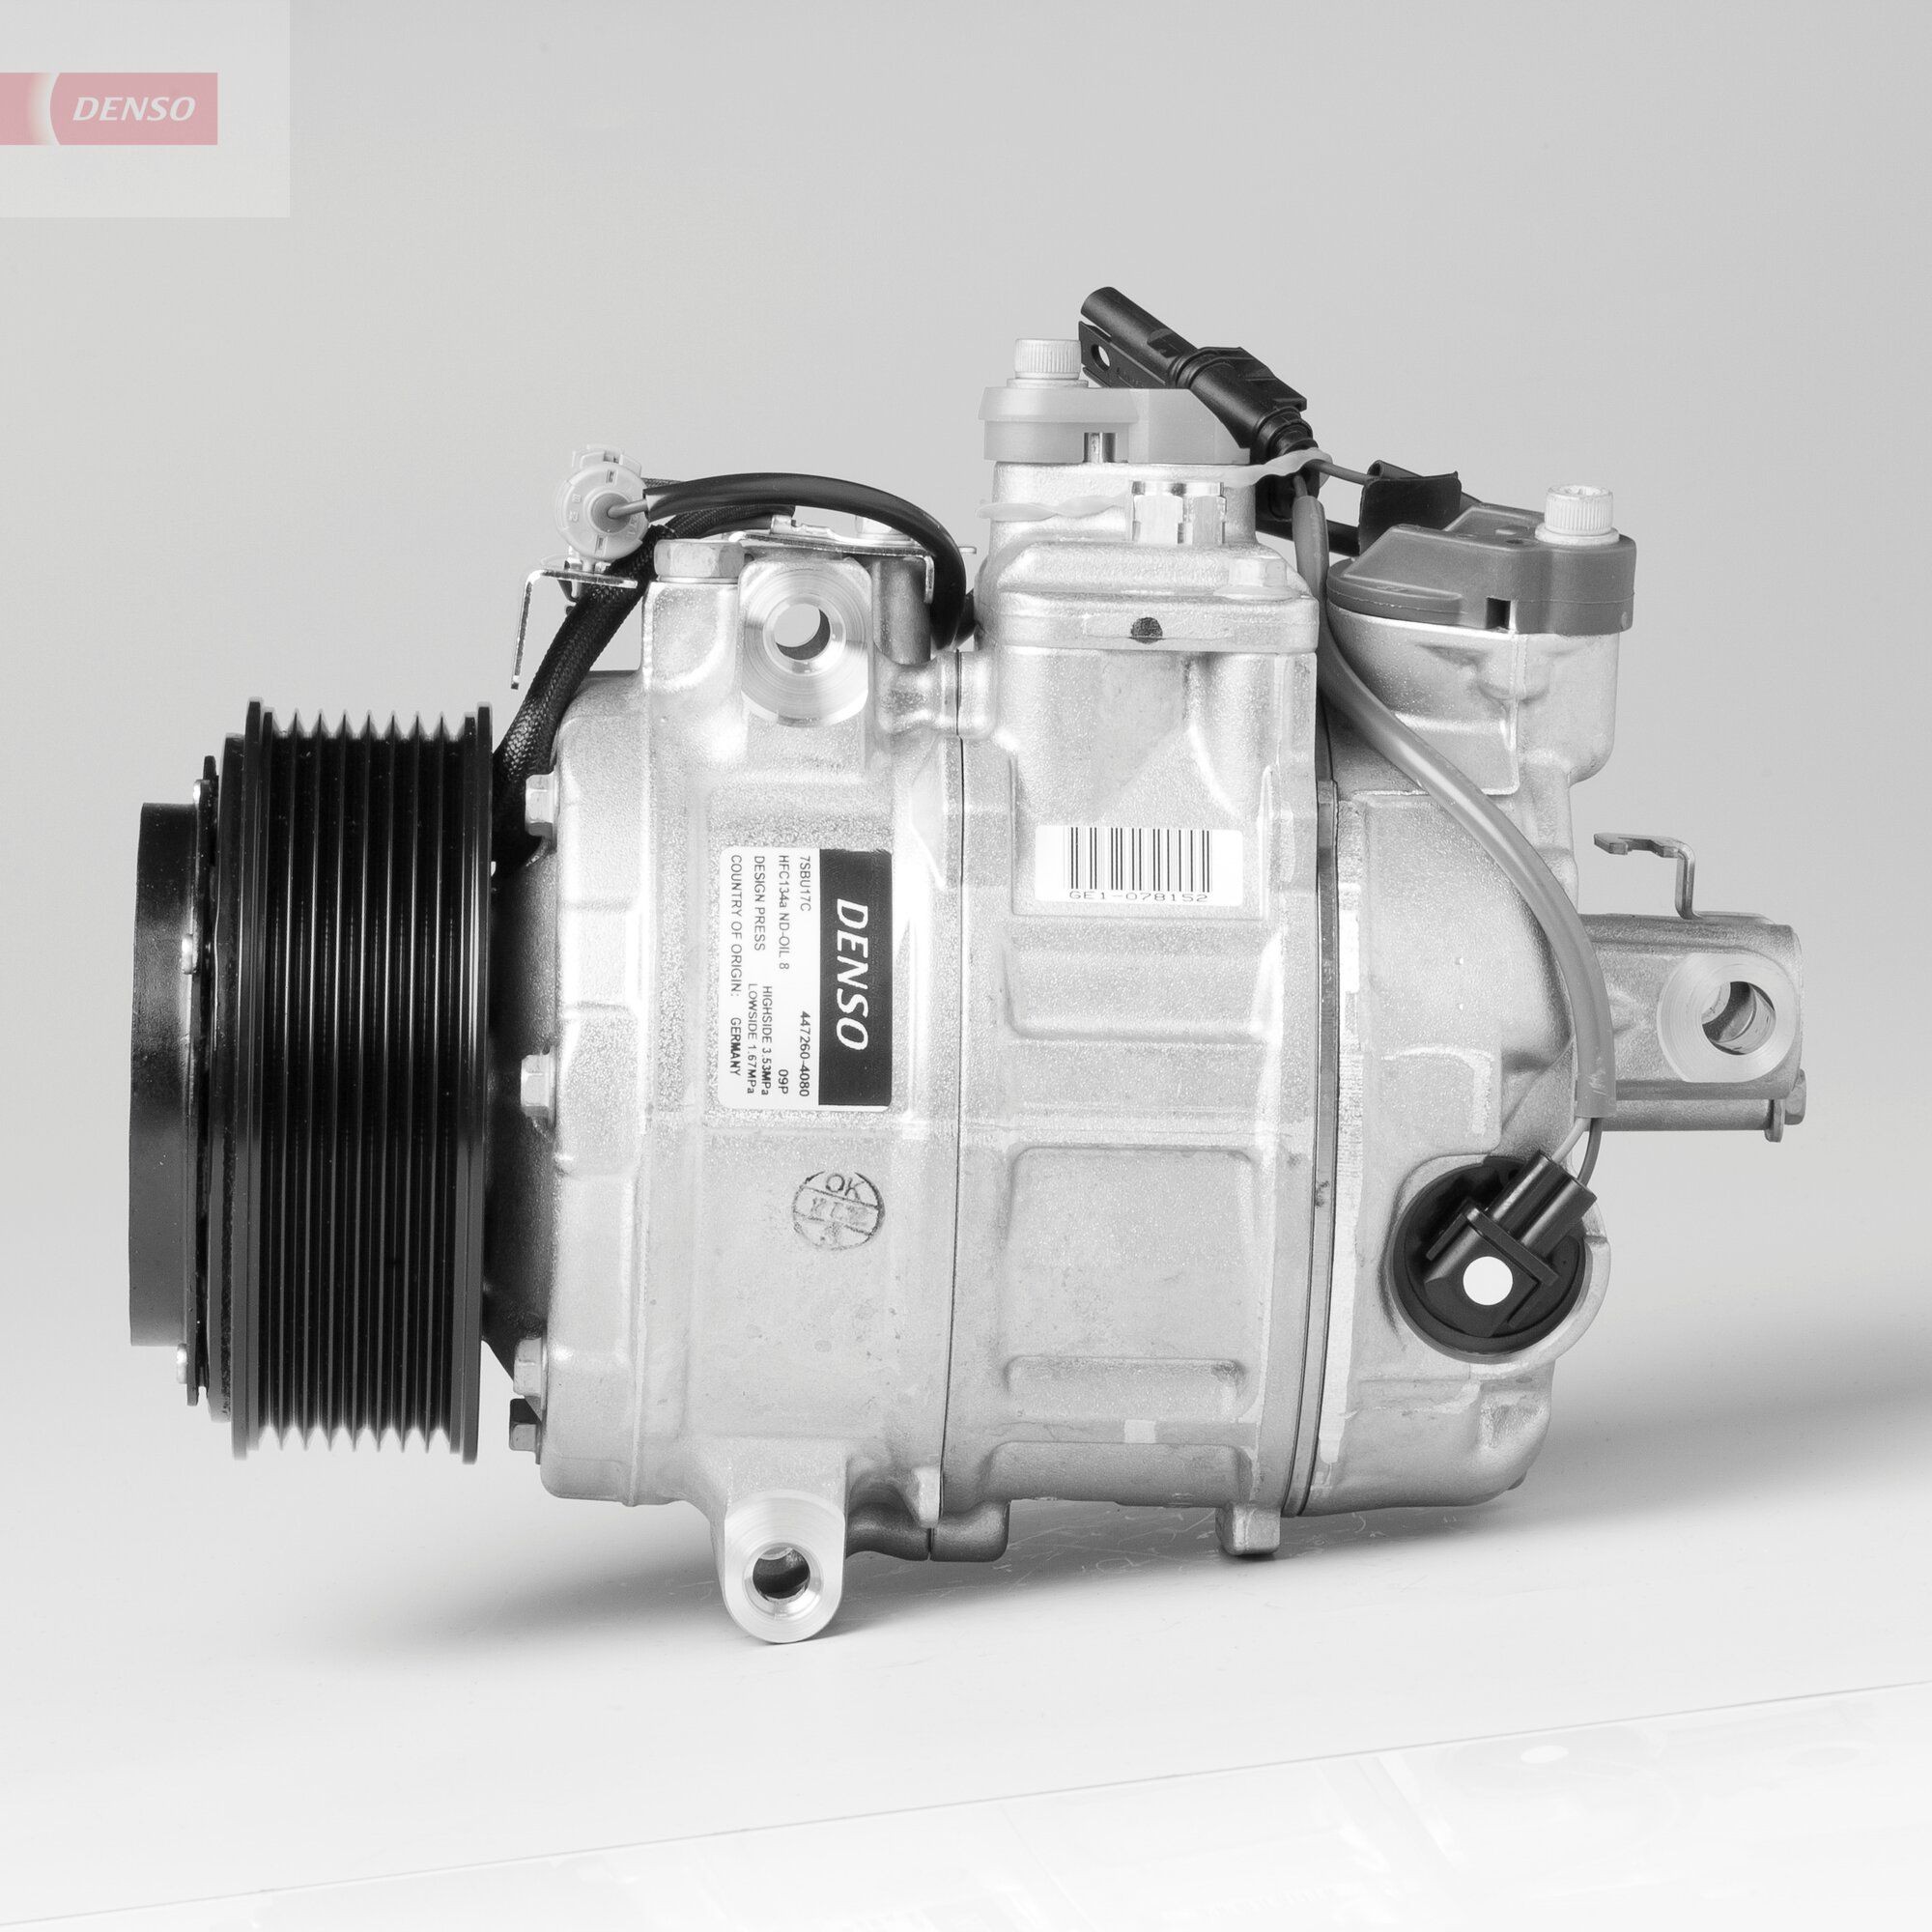 DENSO Air conditioning compressor DCP05078 BMW 5 Series 2011